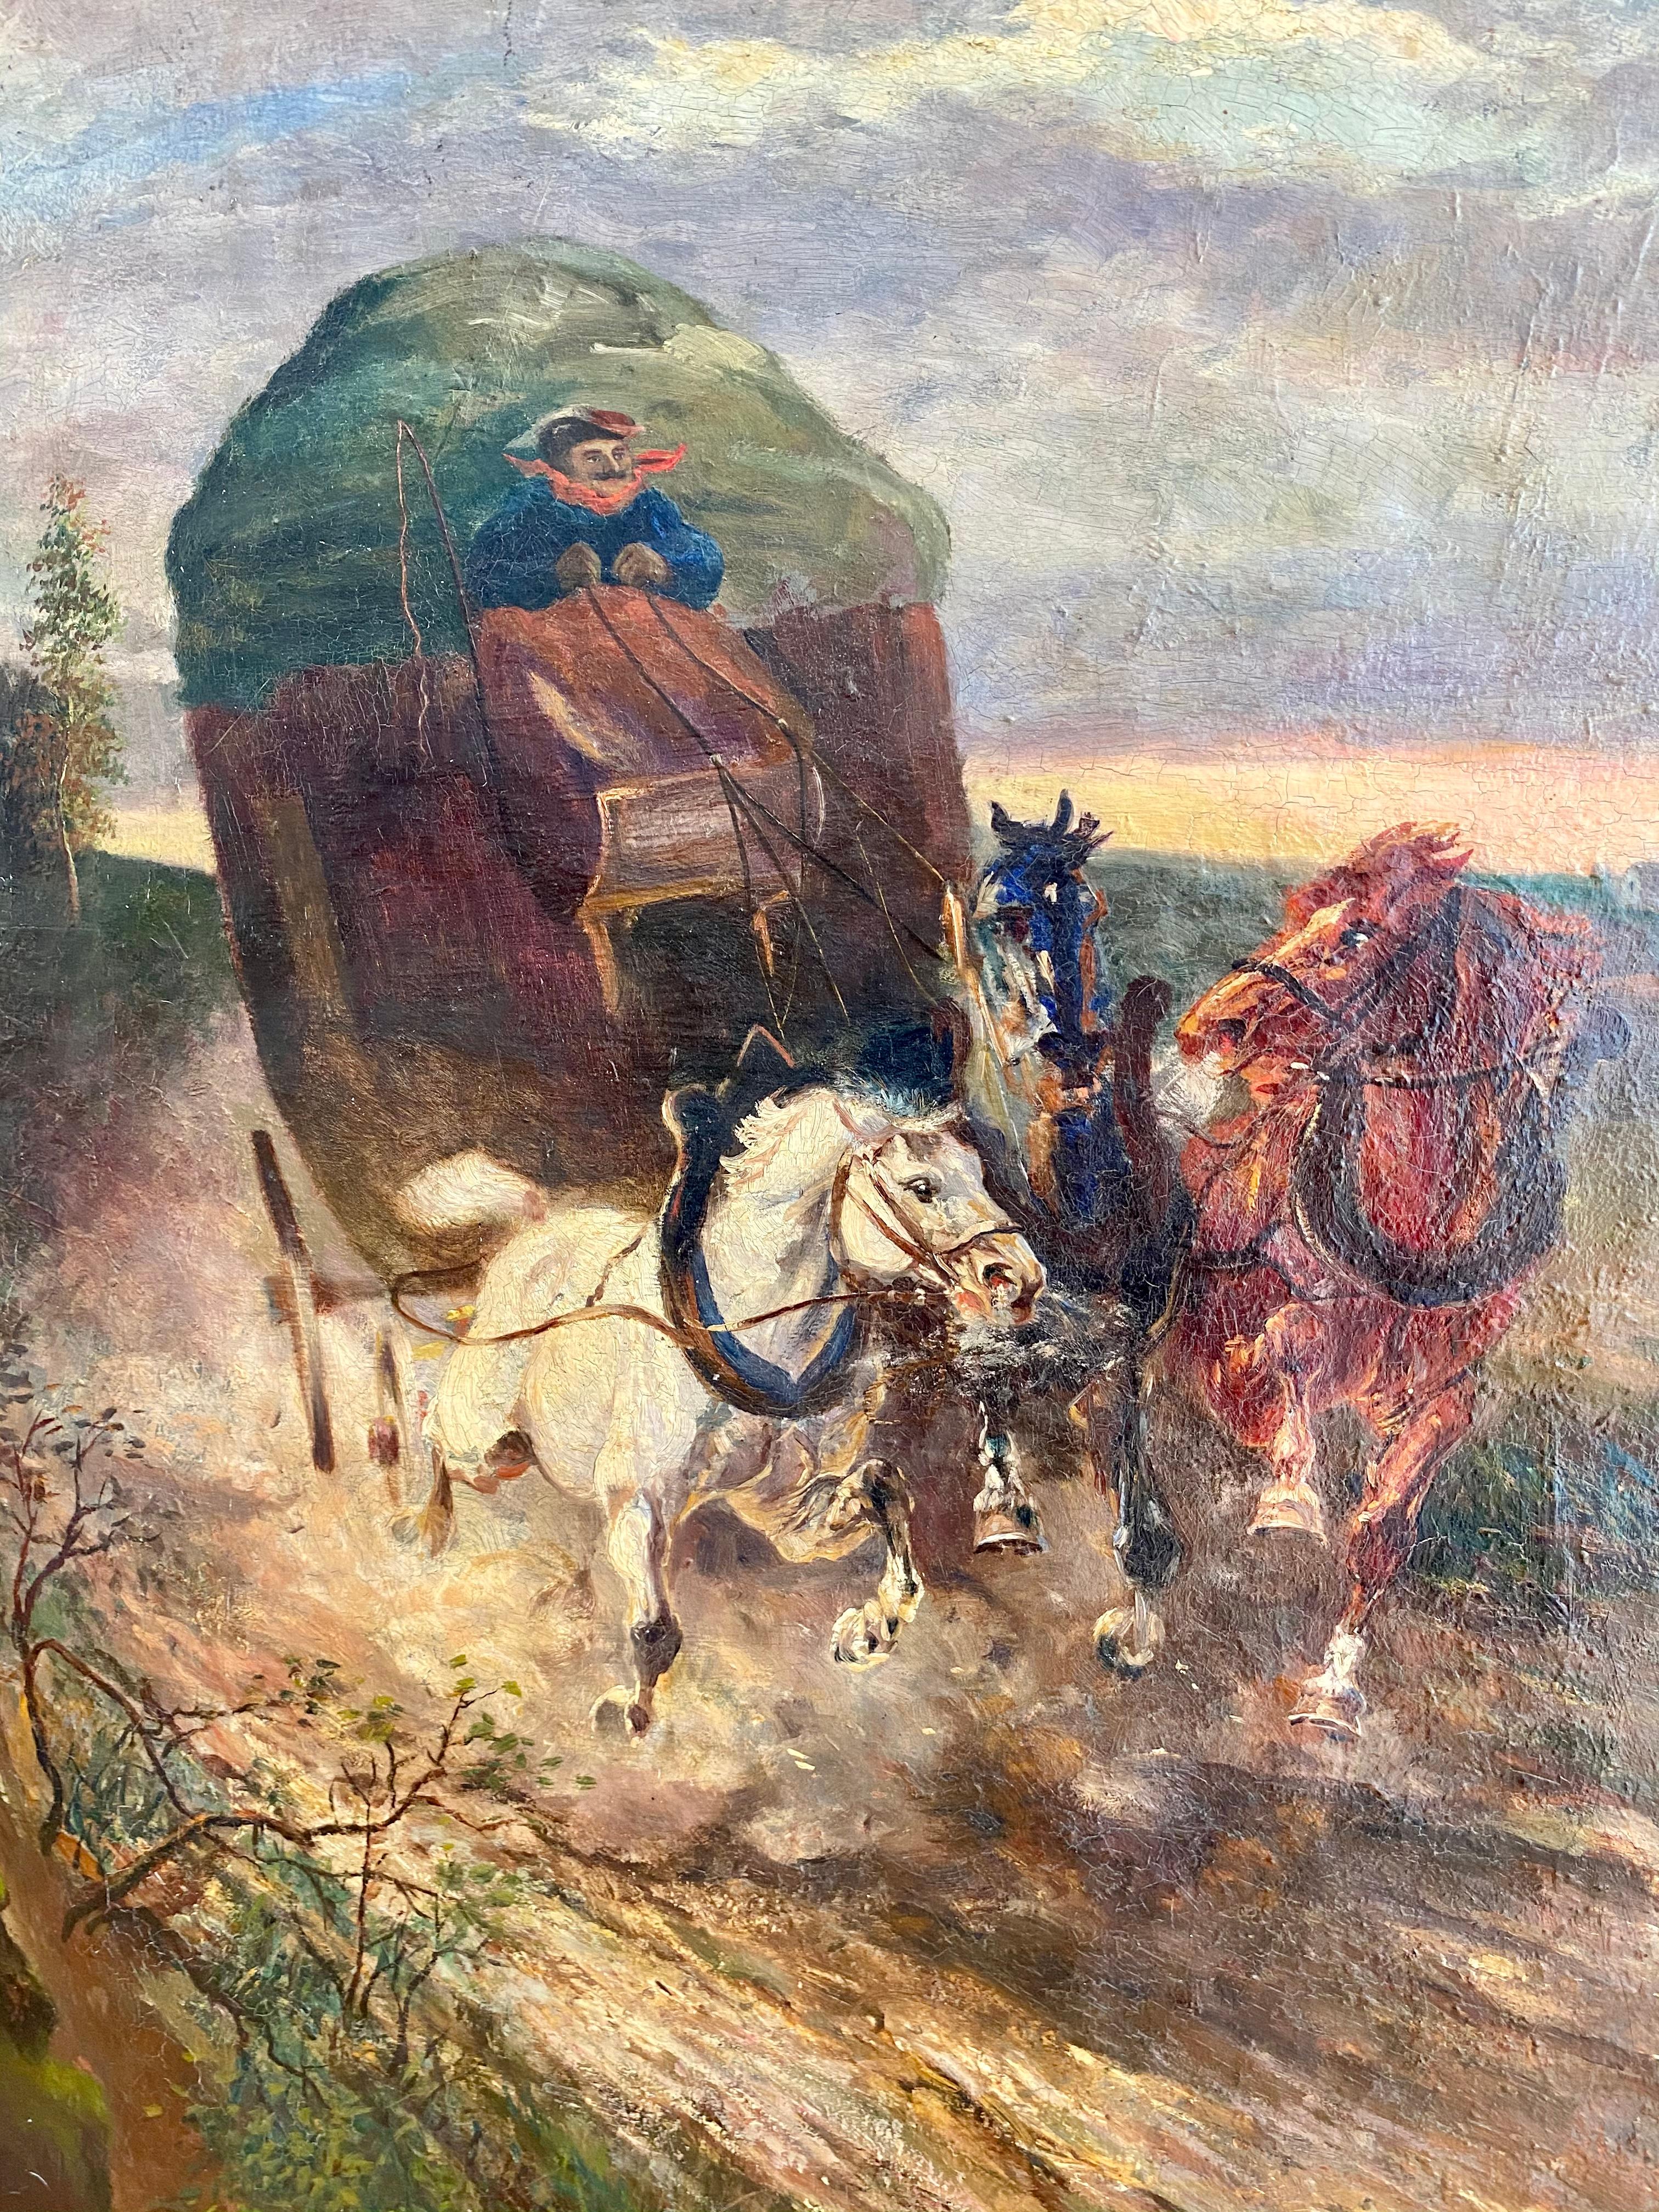 Painting signed and dated lower right 